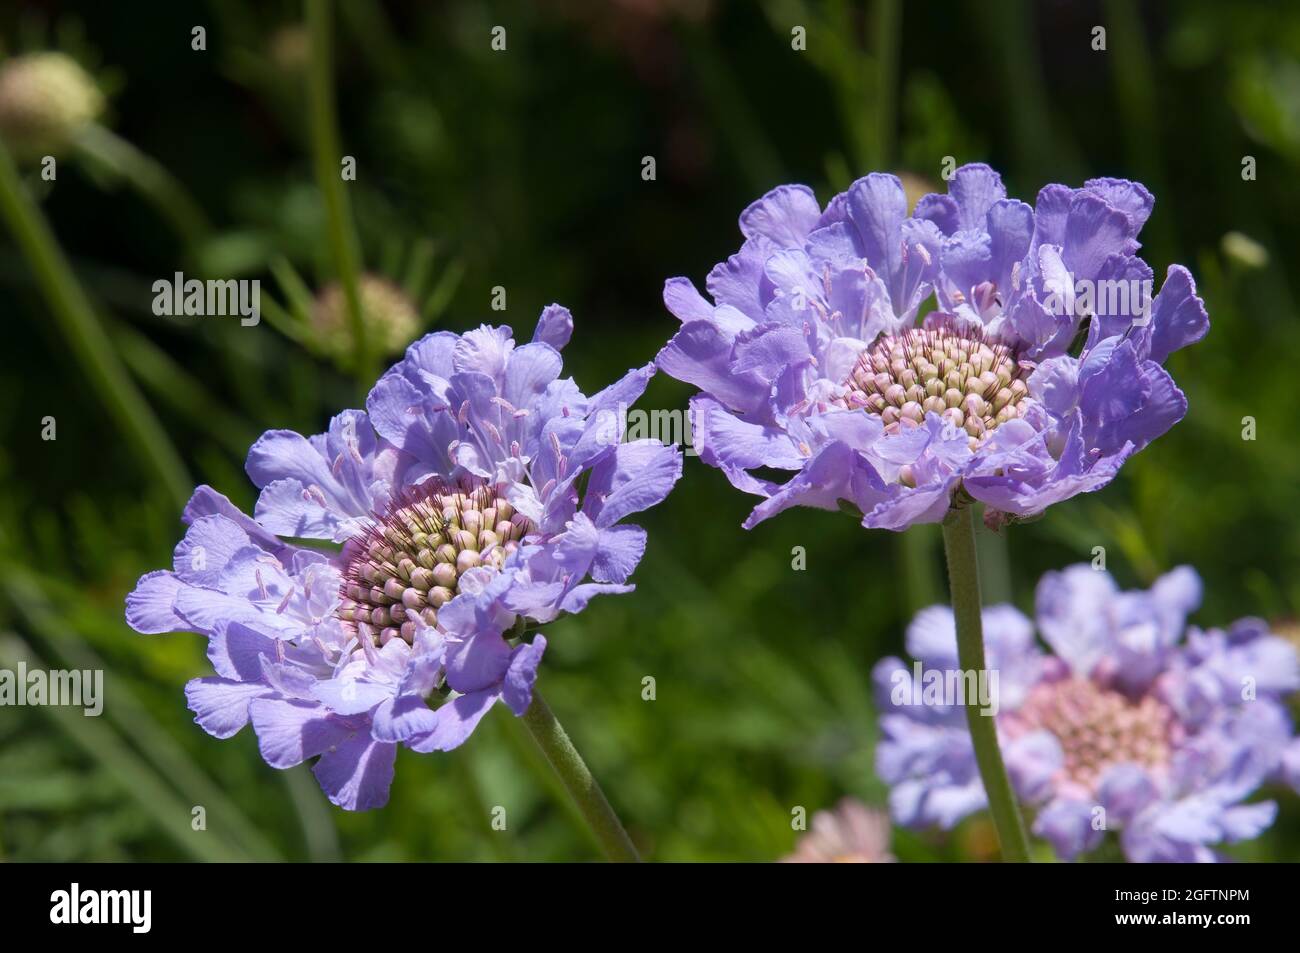 Sydney Australia, caucasian scabious or pincushion-flower native to the Caucasus, north eastern Turkey, and northern Iran. Stock Photo